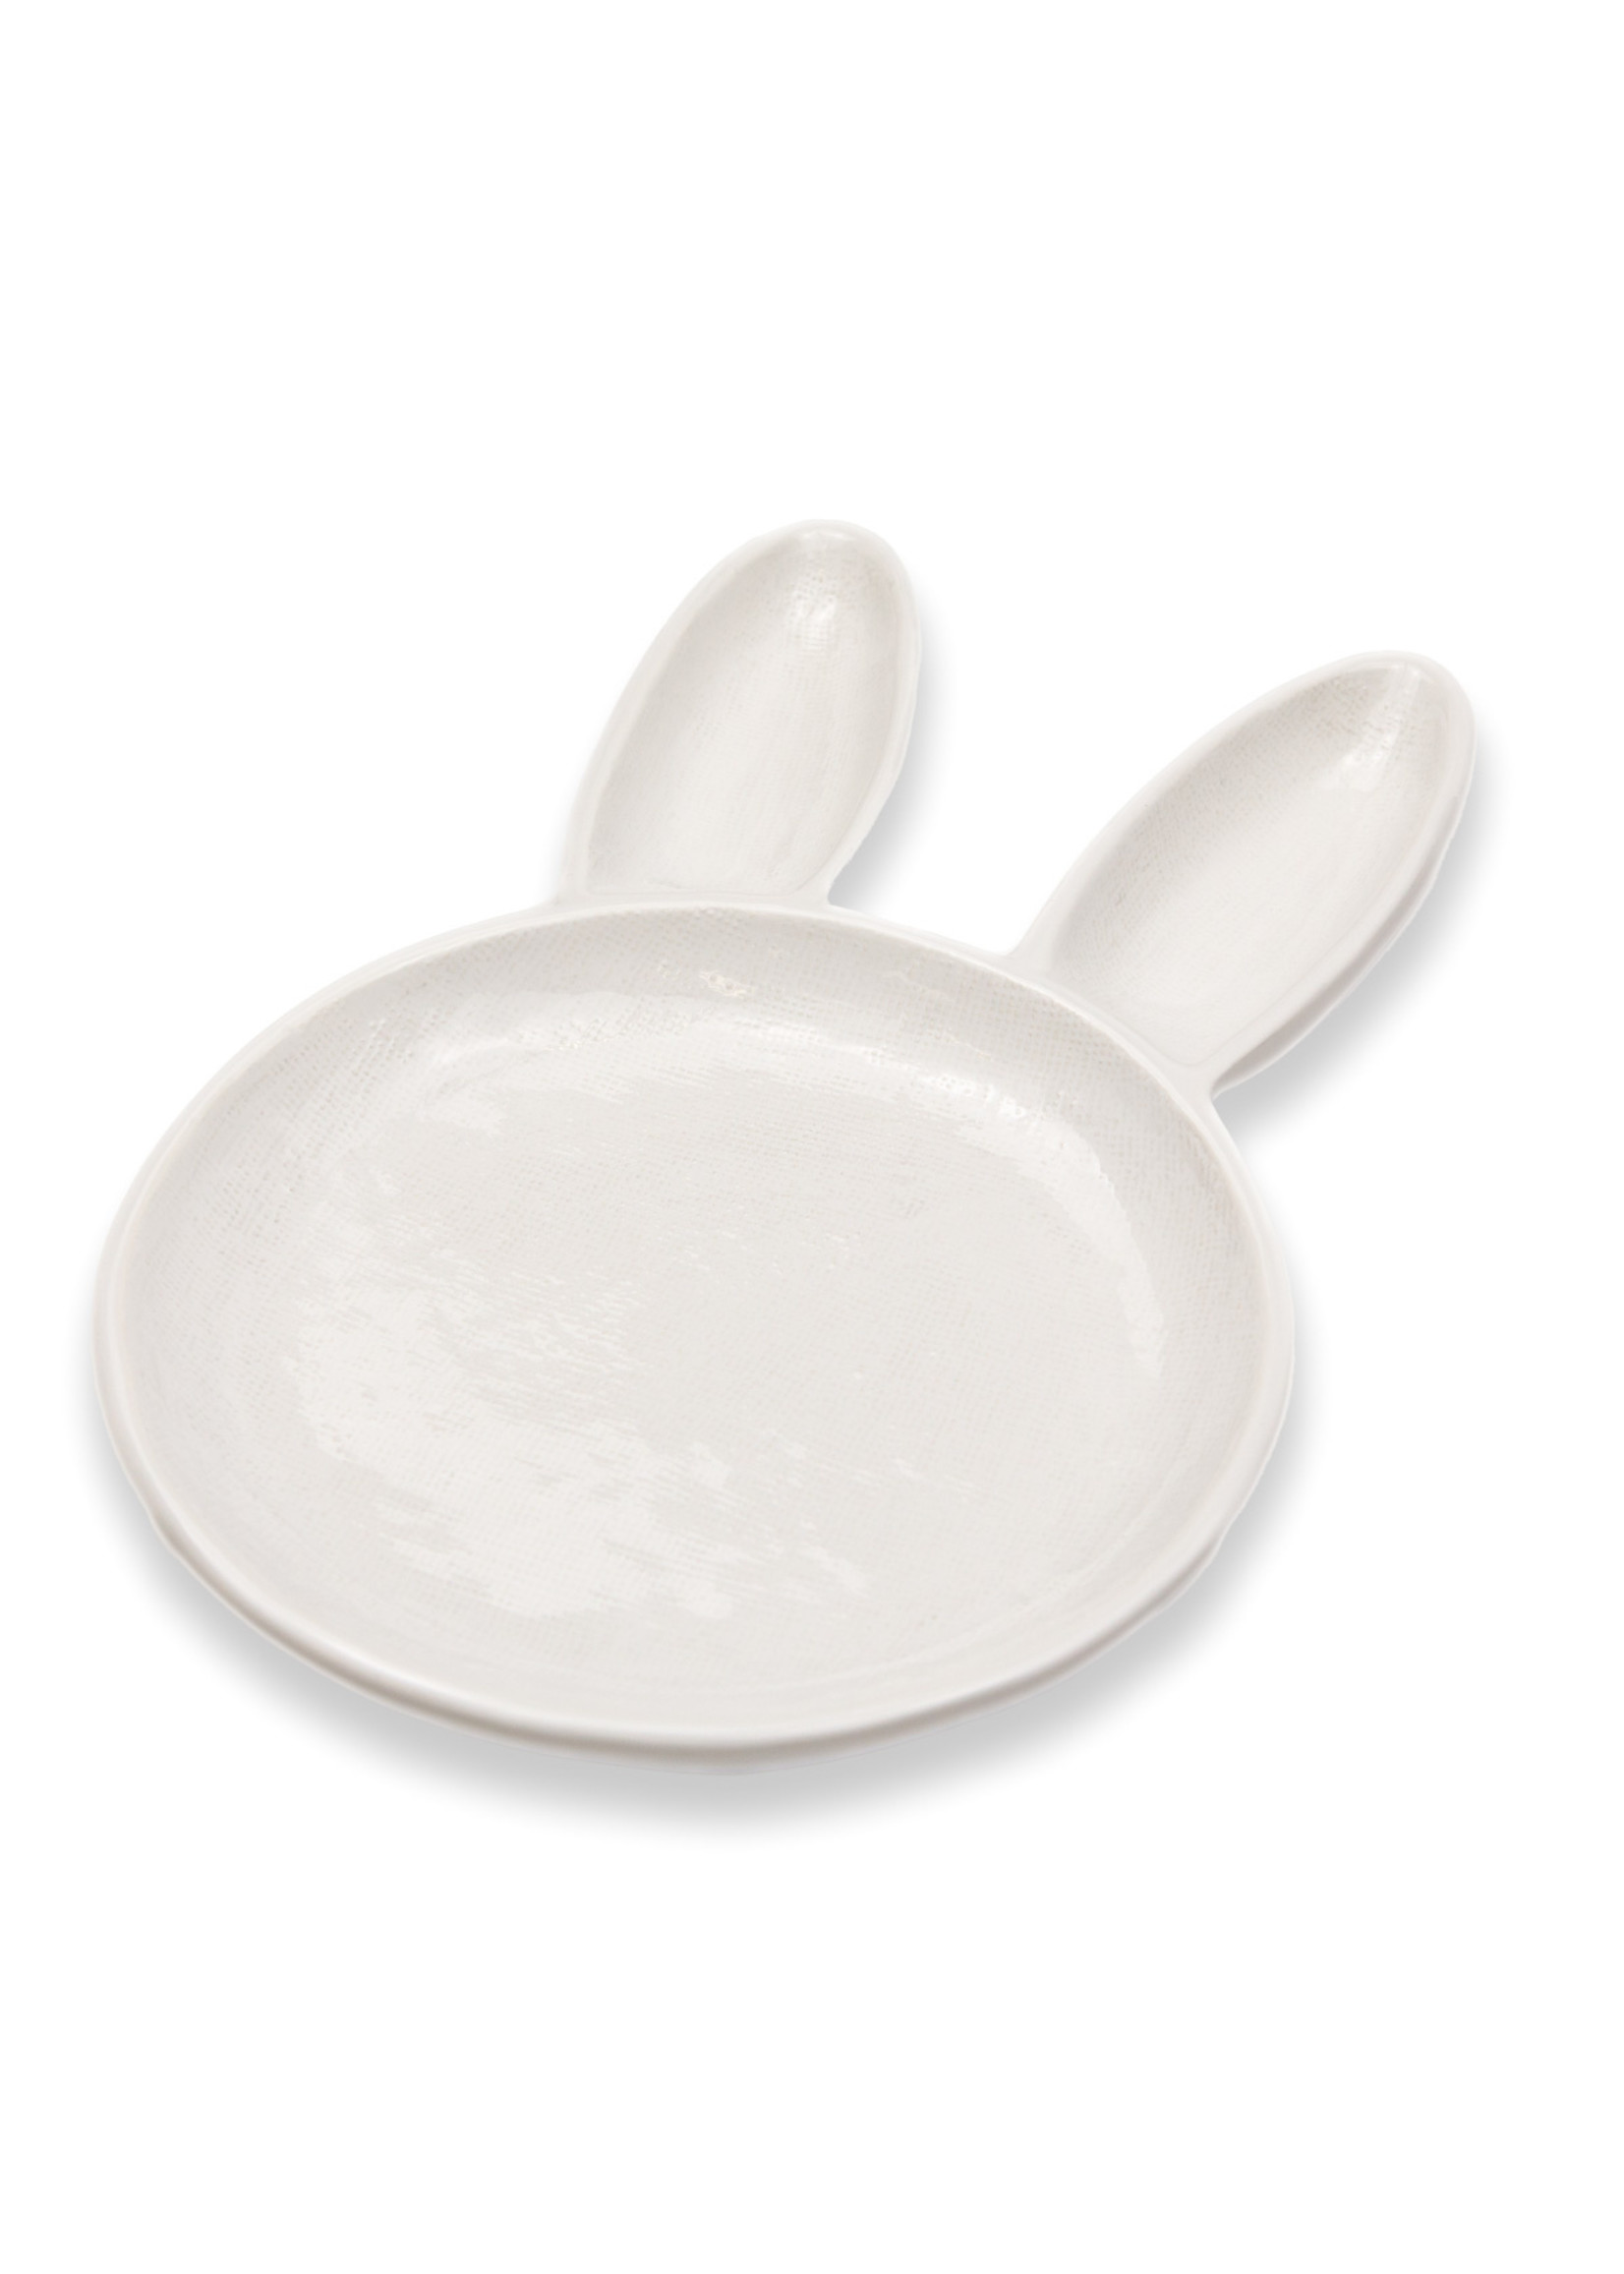 The Royal Standard Bunny Divided White Dish